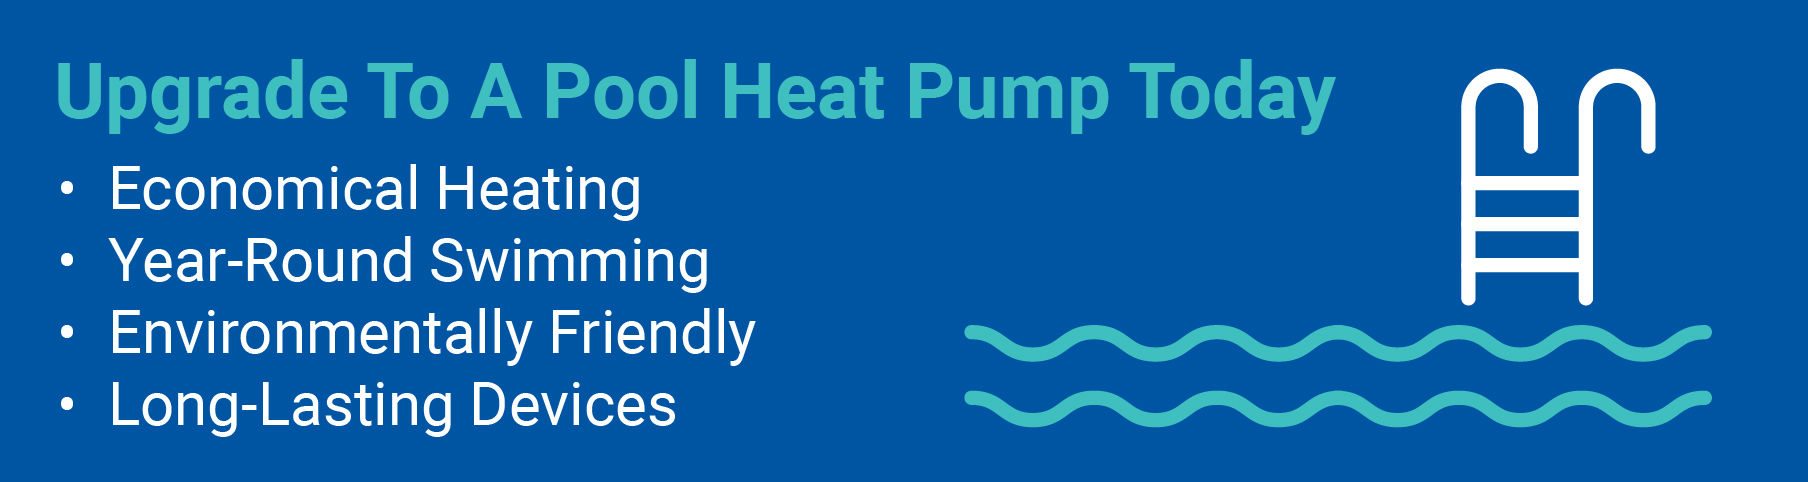 Infographic Explaining The Benefits of Pool Heat Pumps